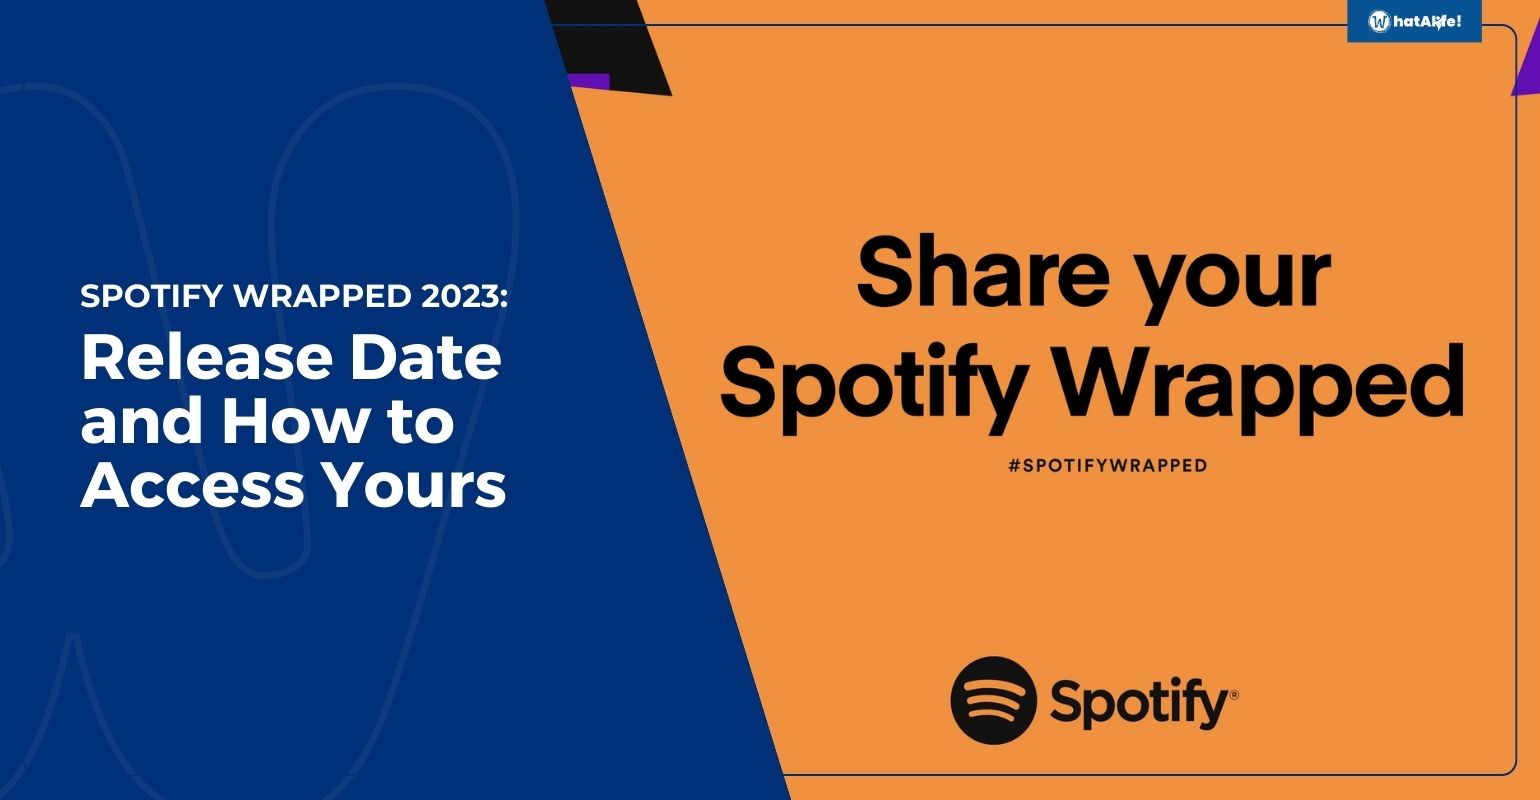 spotify wrapped 2023 release date and how to access yours